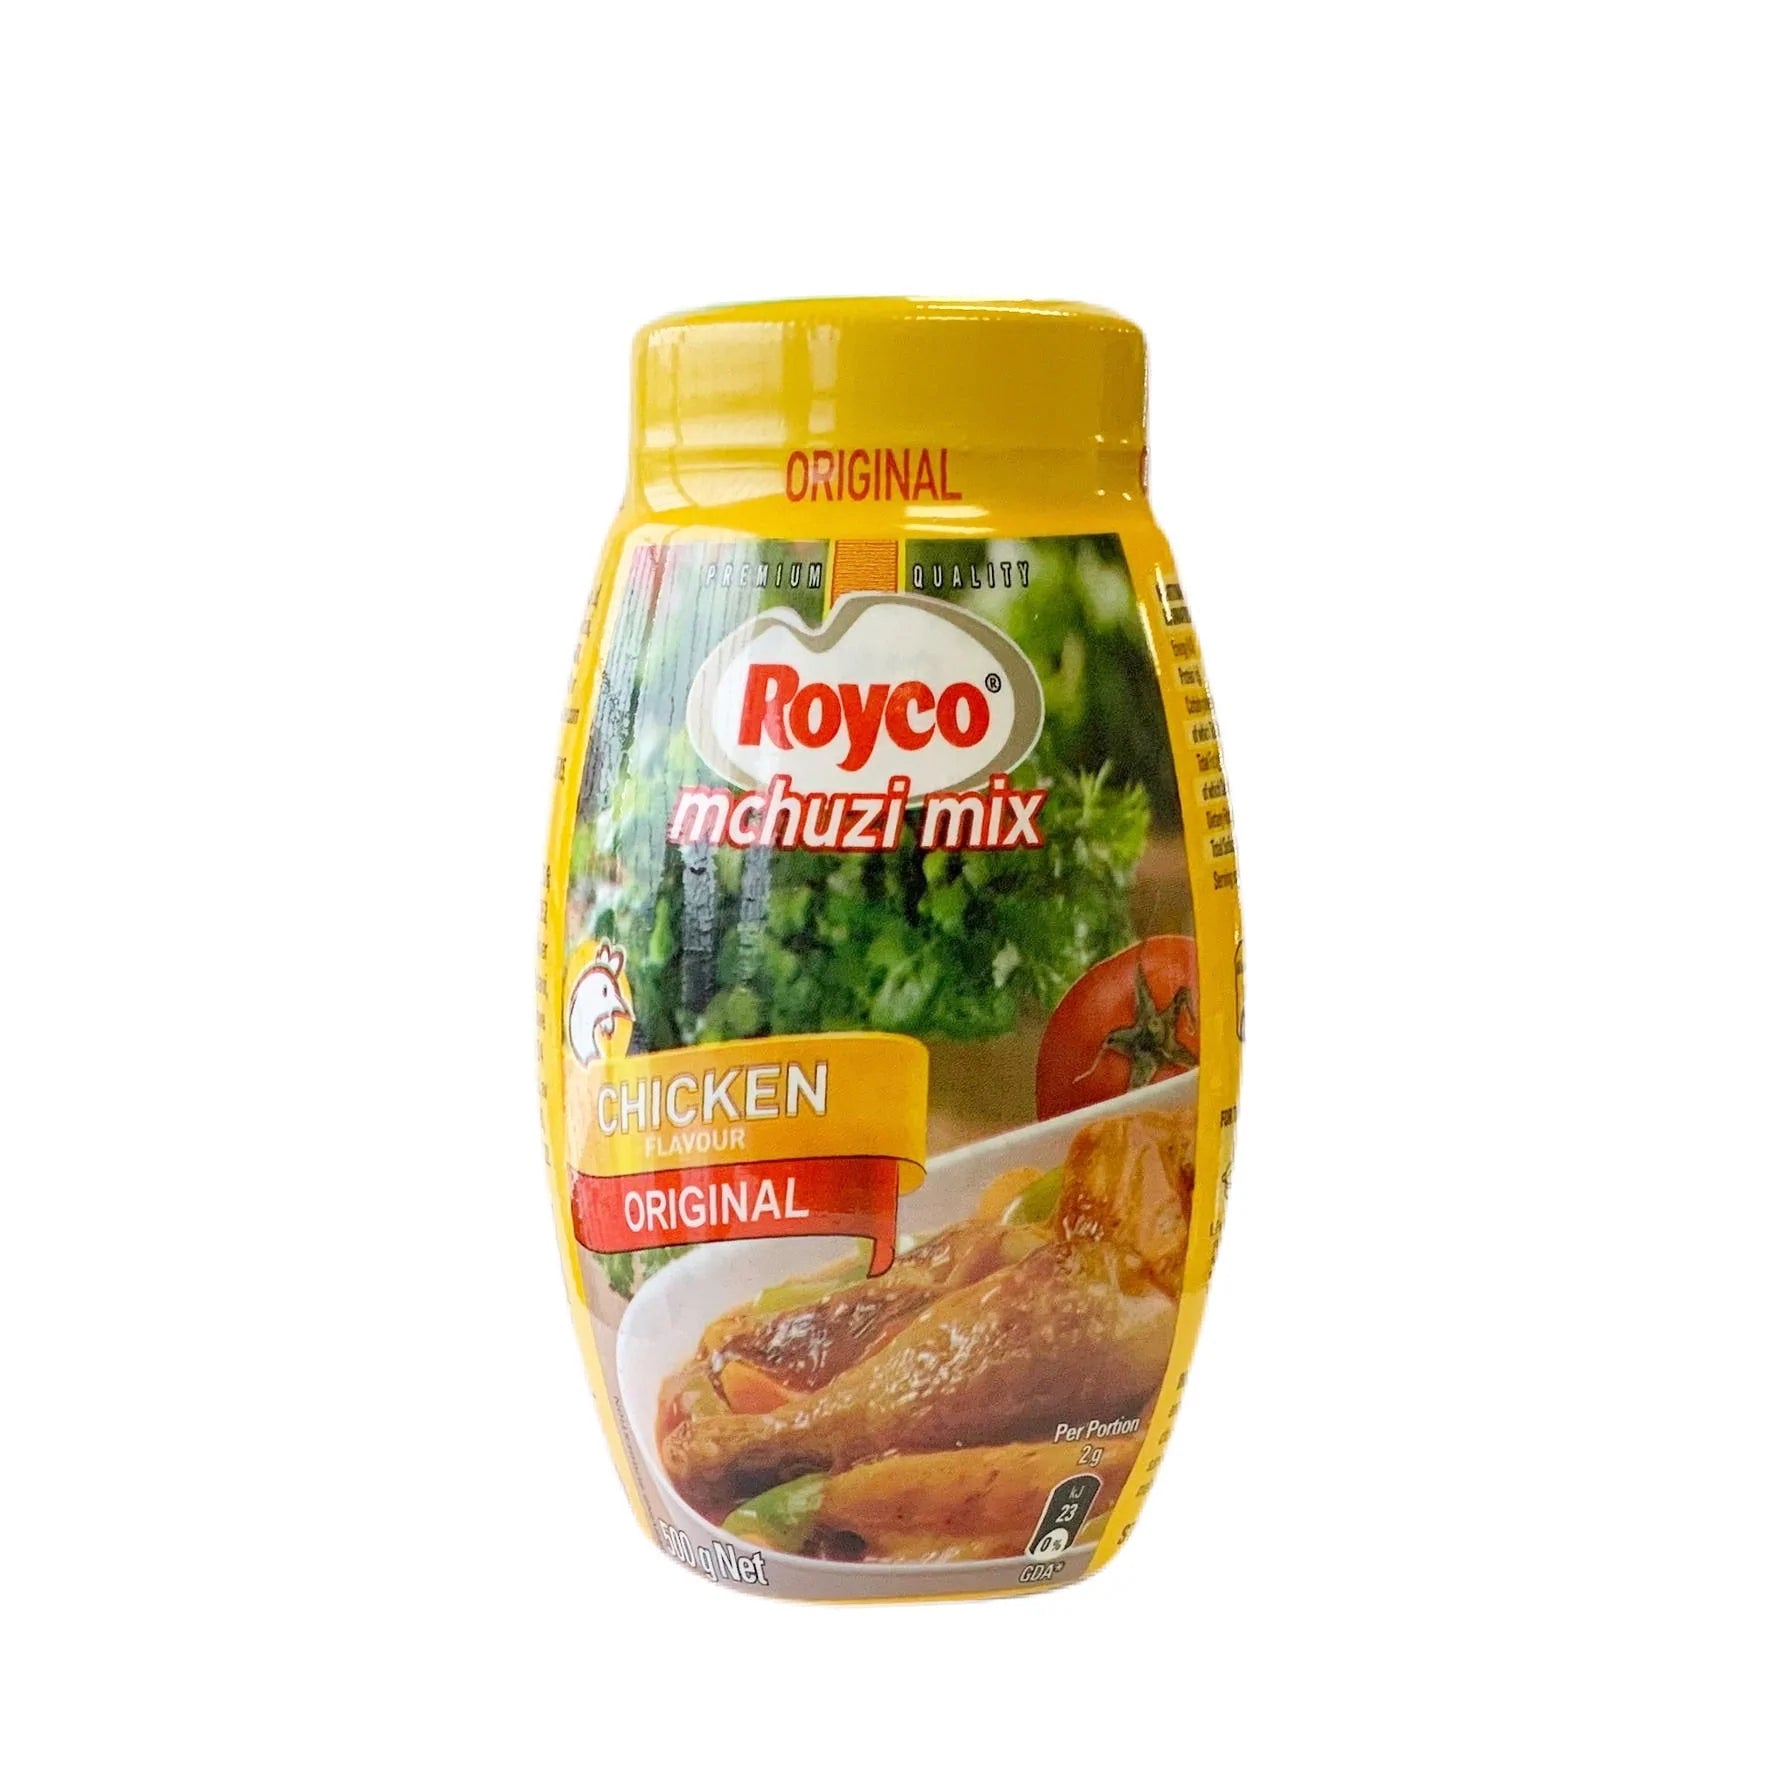 Unilever launches collection of 11 Royco spices 